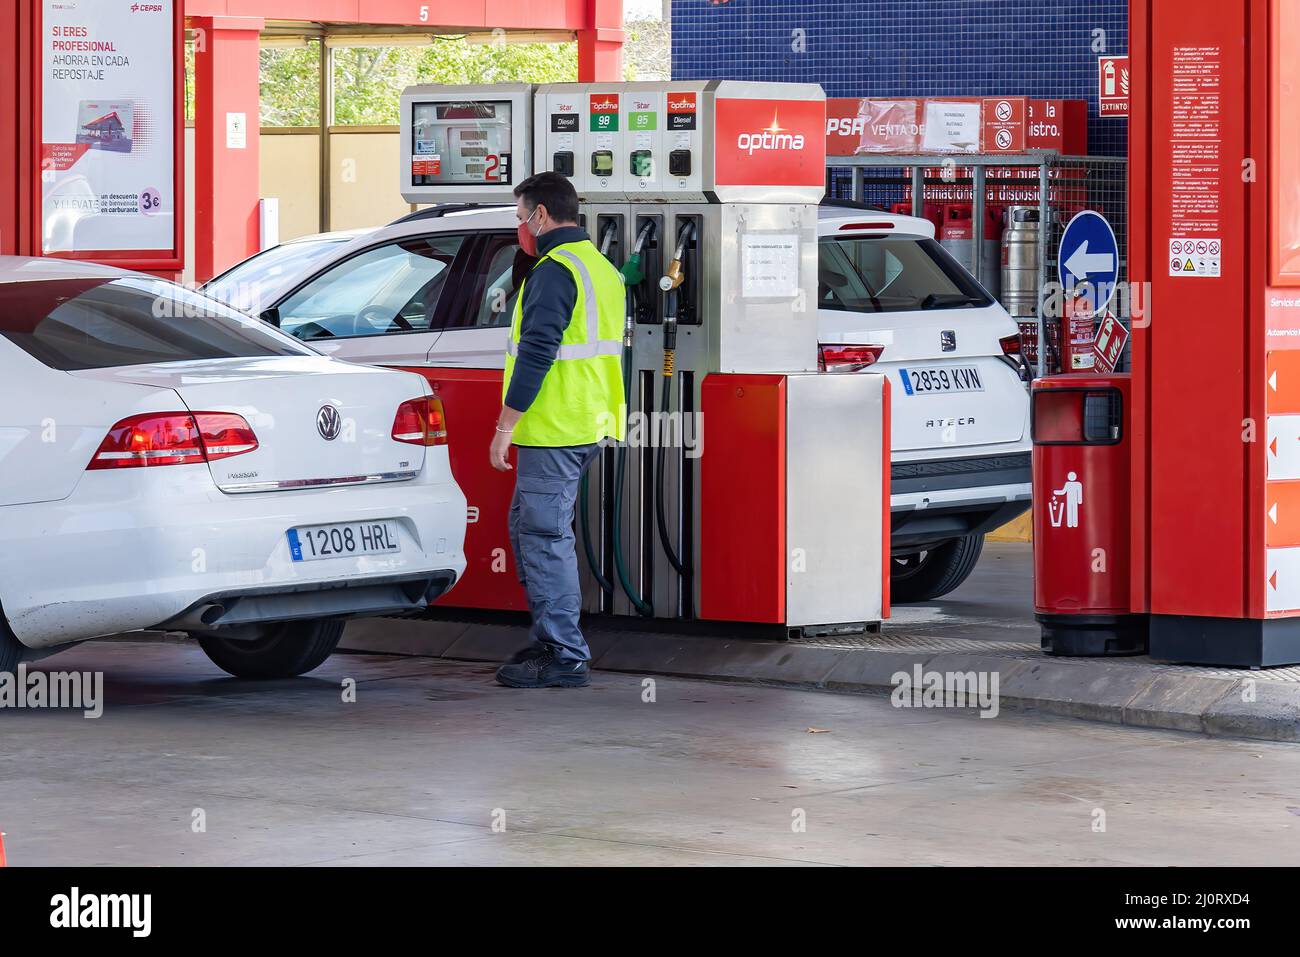 Huelva, Spain - March 6, 2022: View of a petrol pump at a gas station with a car that is refueling Stock Photo